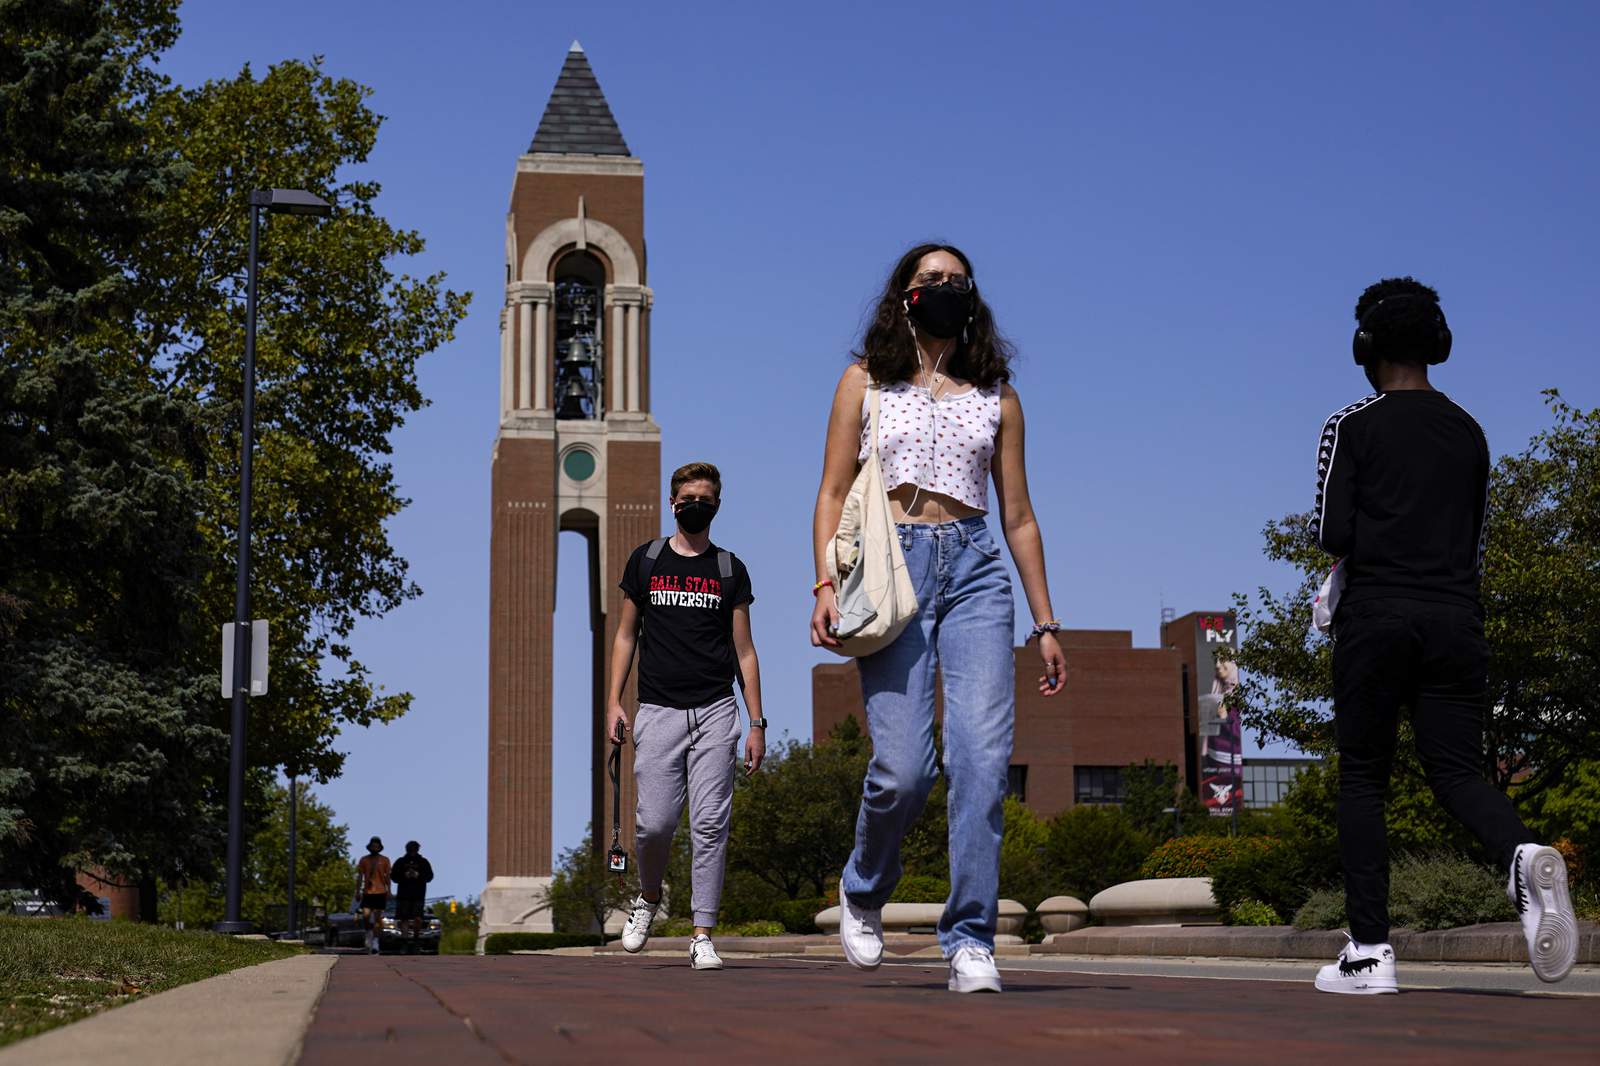 Infection rates soar in college towns as students return